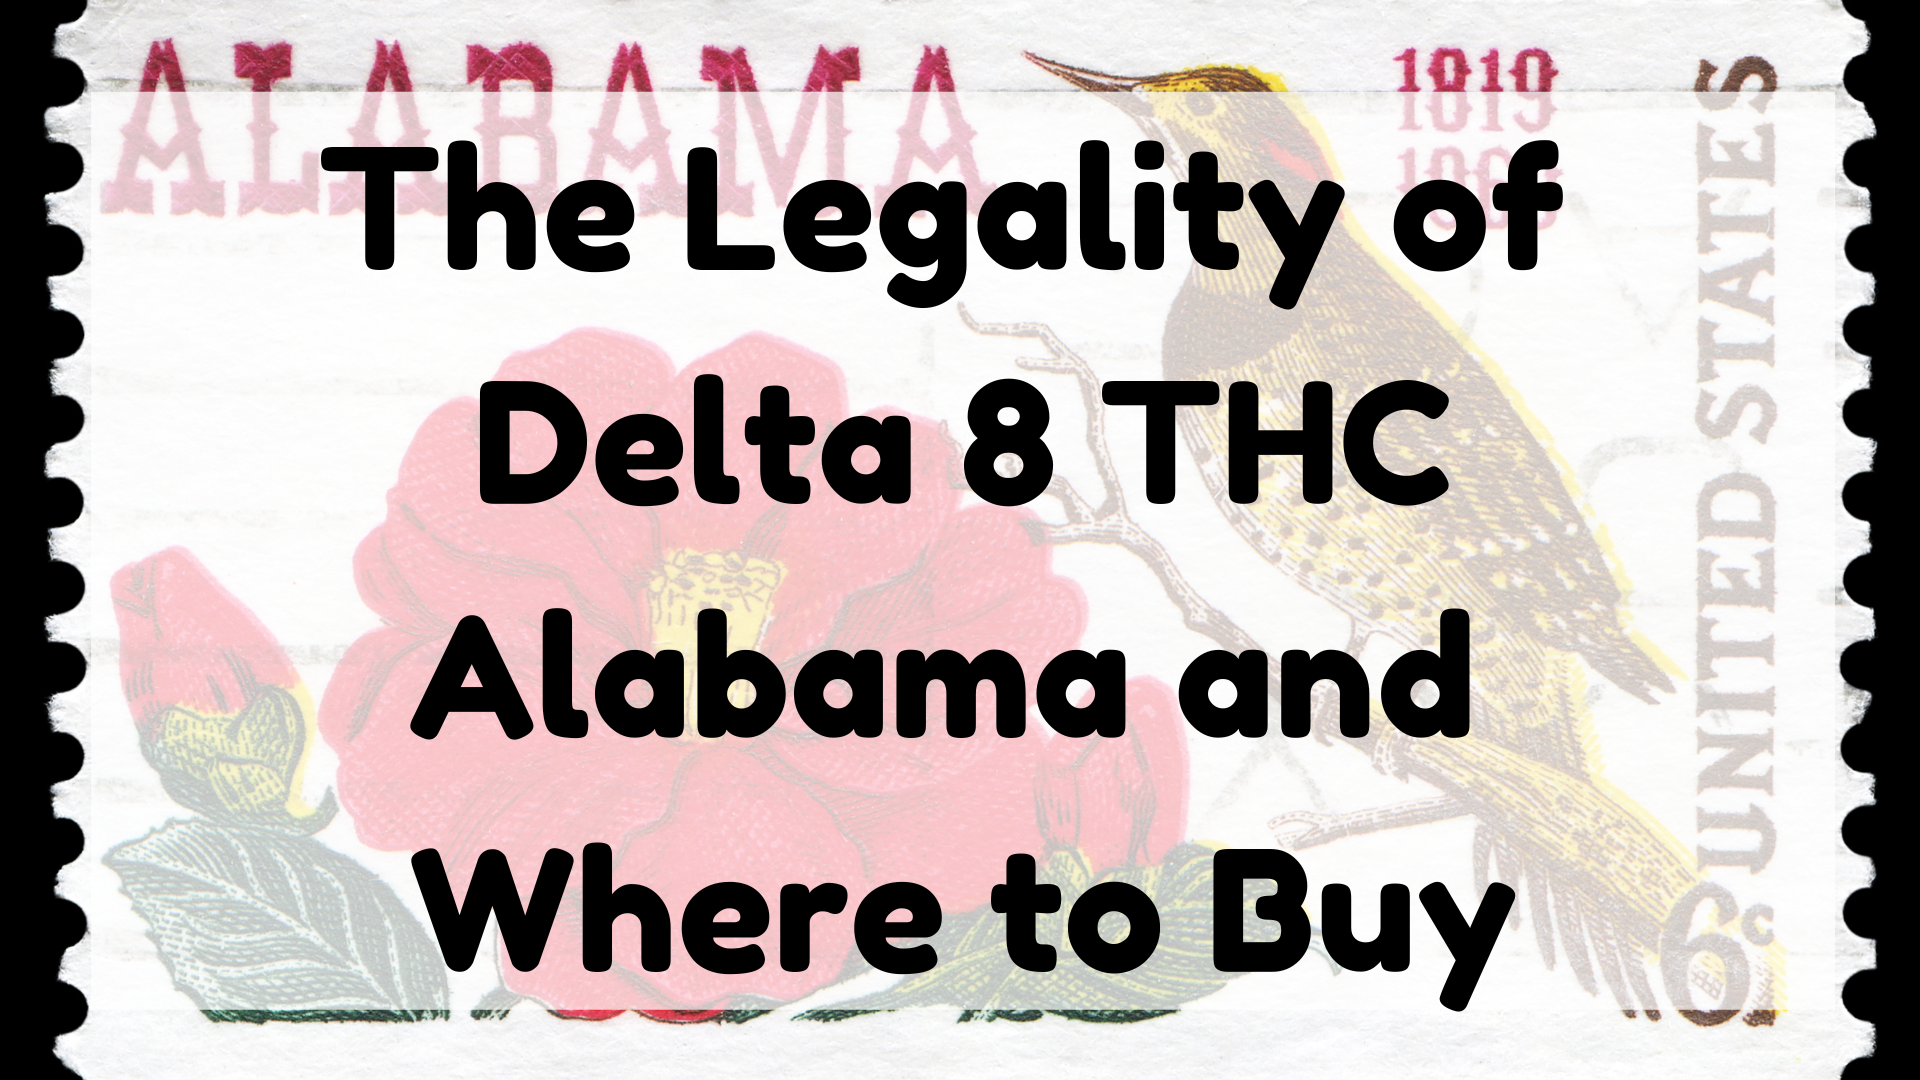 The legality of Delta 8 THC Alabama featured image